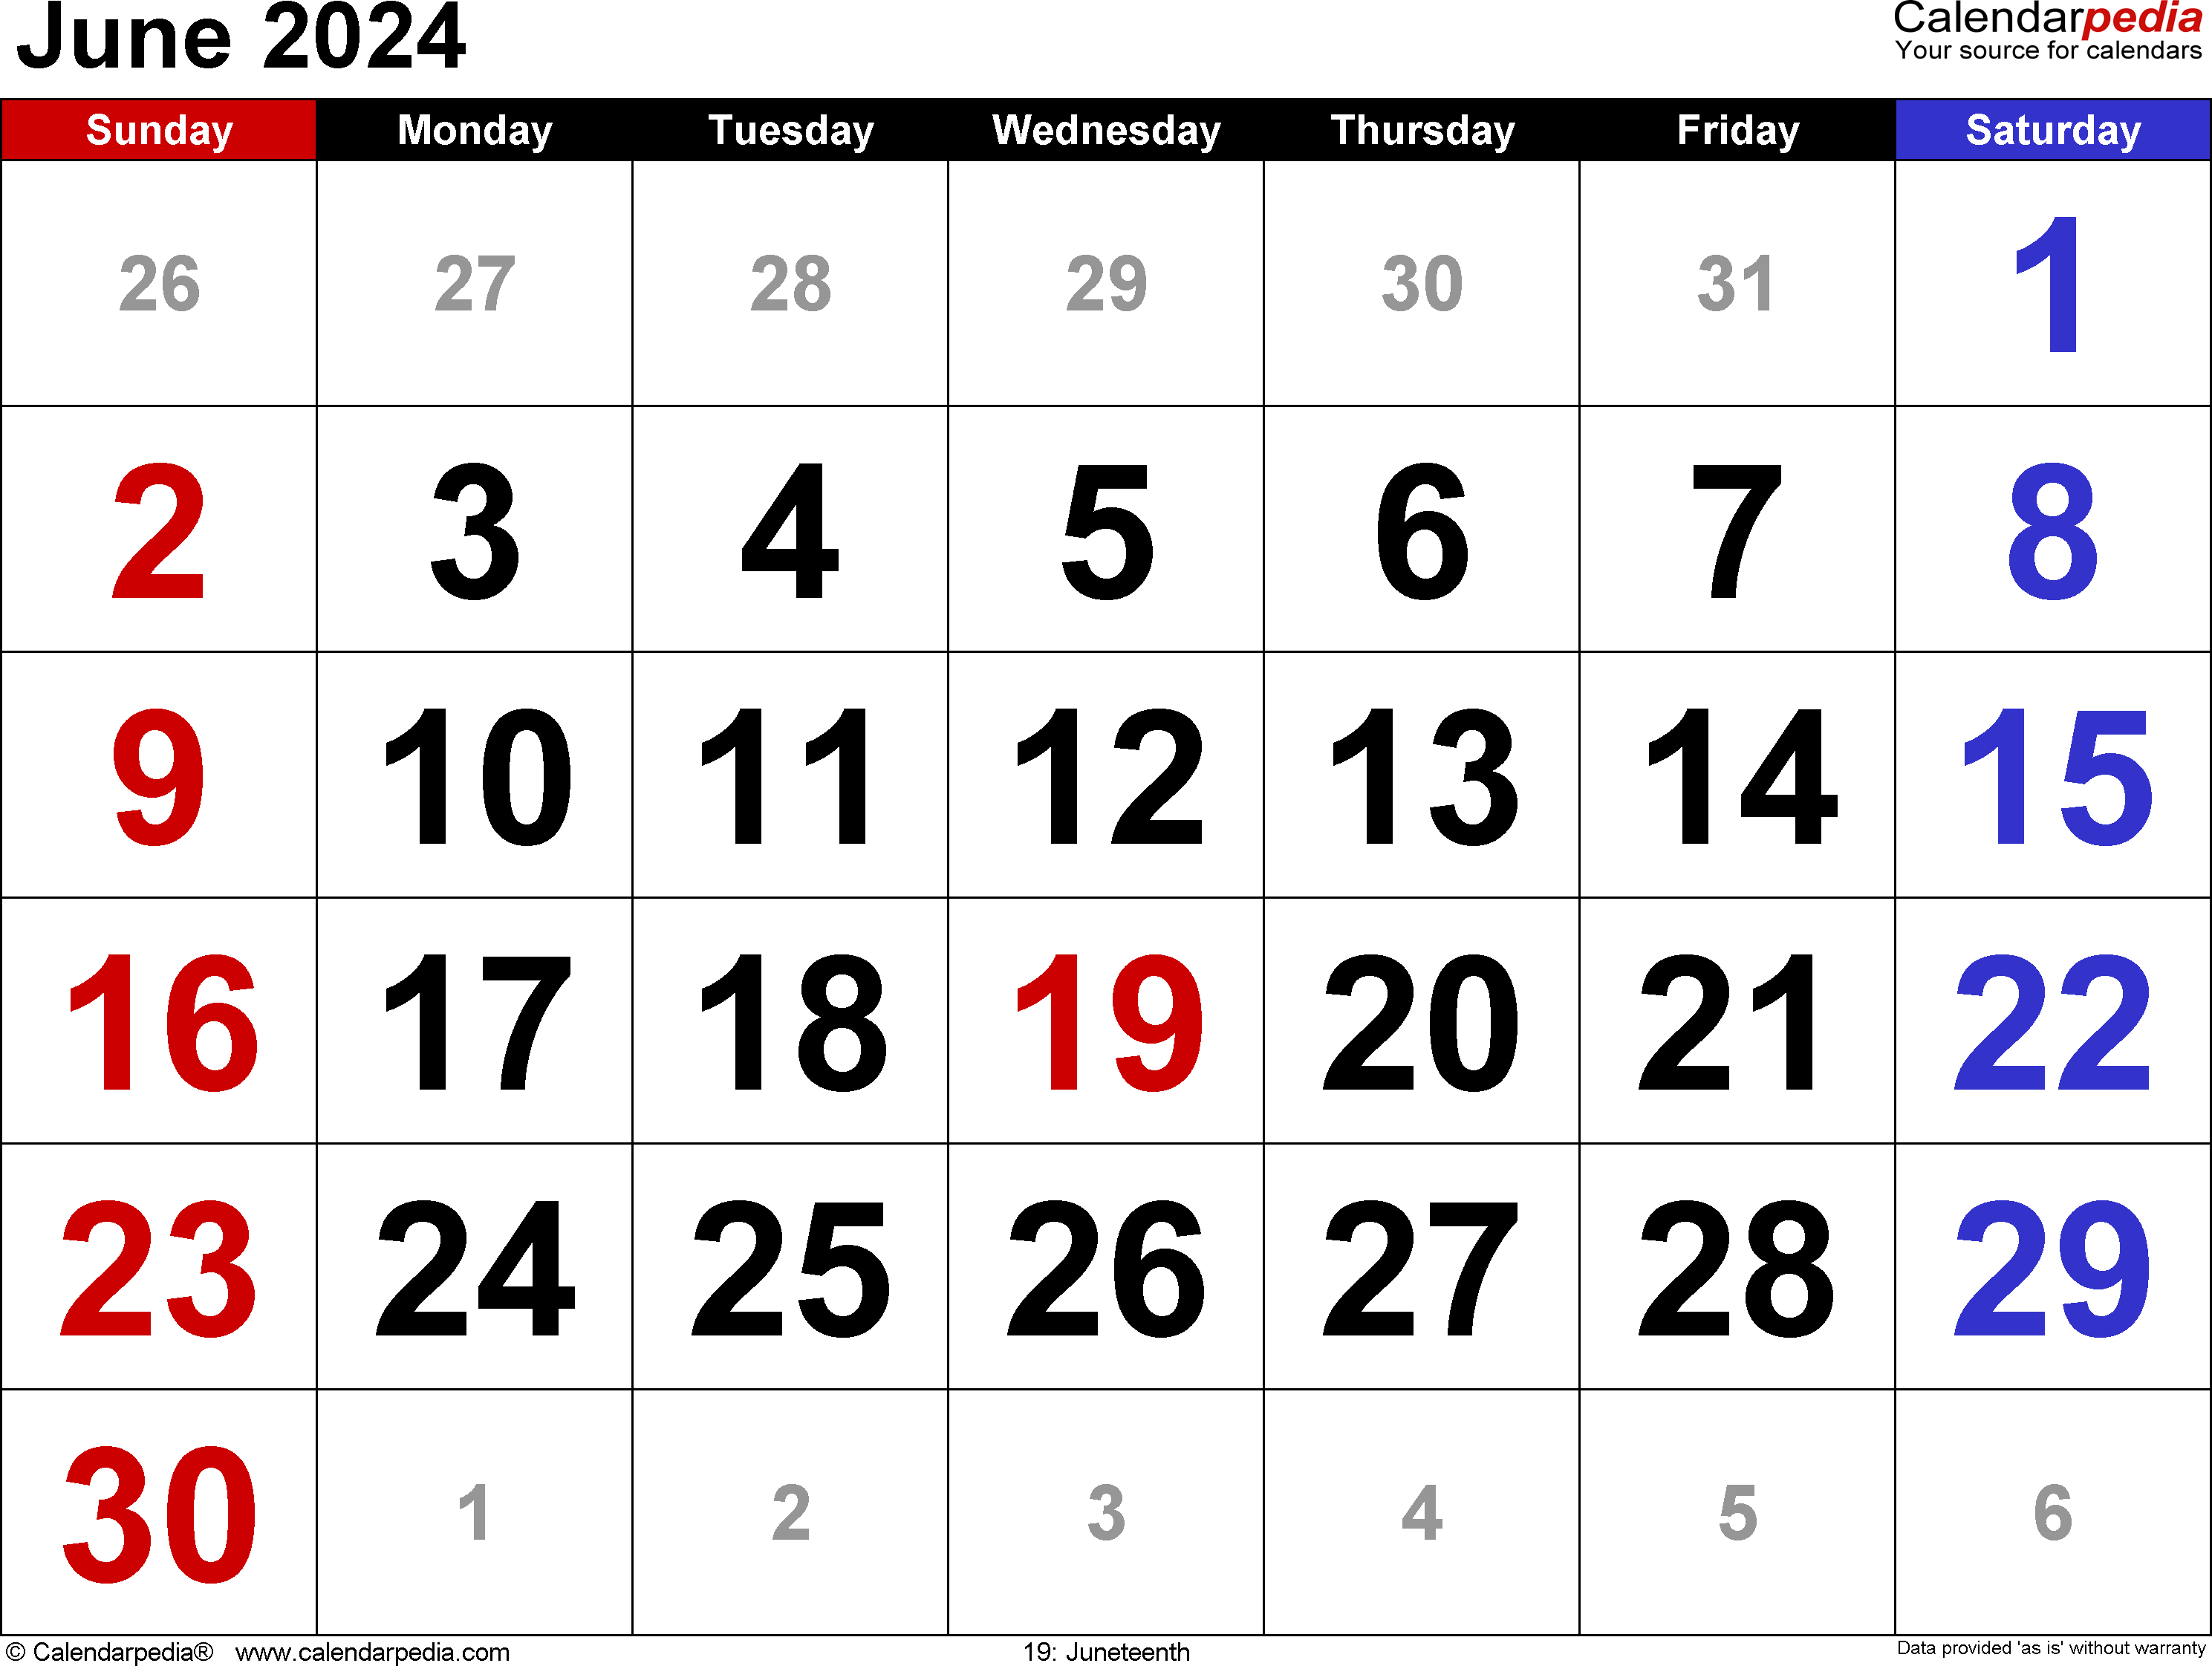 June 2024 Calendar | Templates For Word, Excel And Pdf for The Calendar For The Month Of June 2024